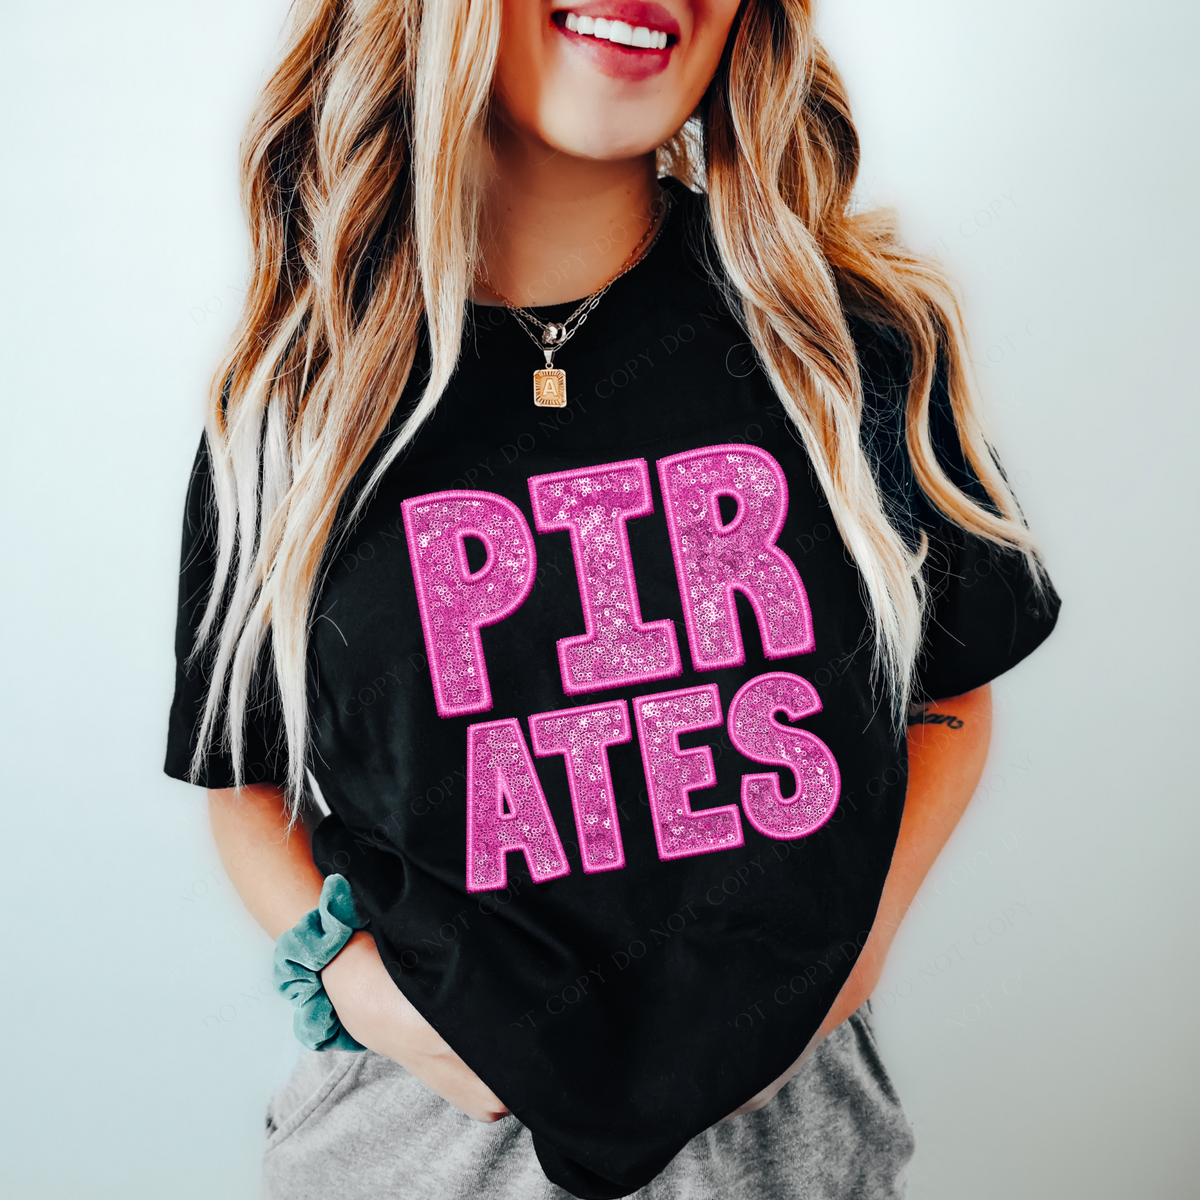 Pirates Embroidery & Sequin in Pink Mascot Digital Design, PNG